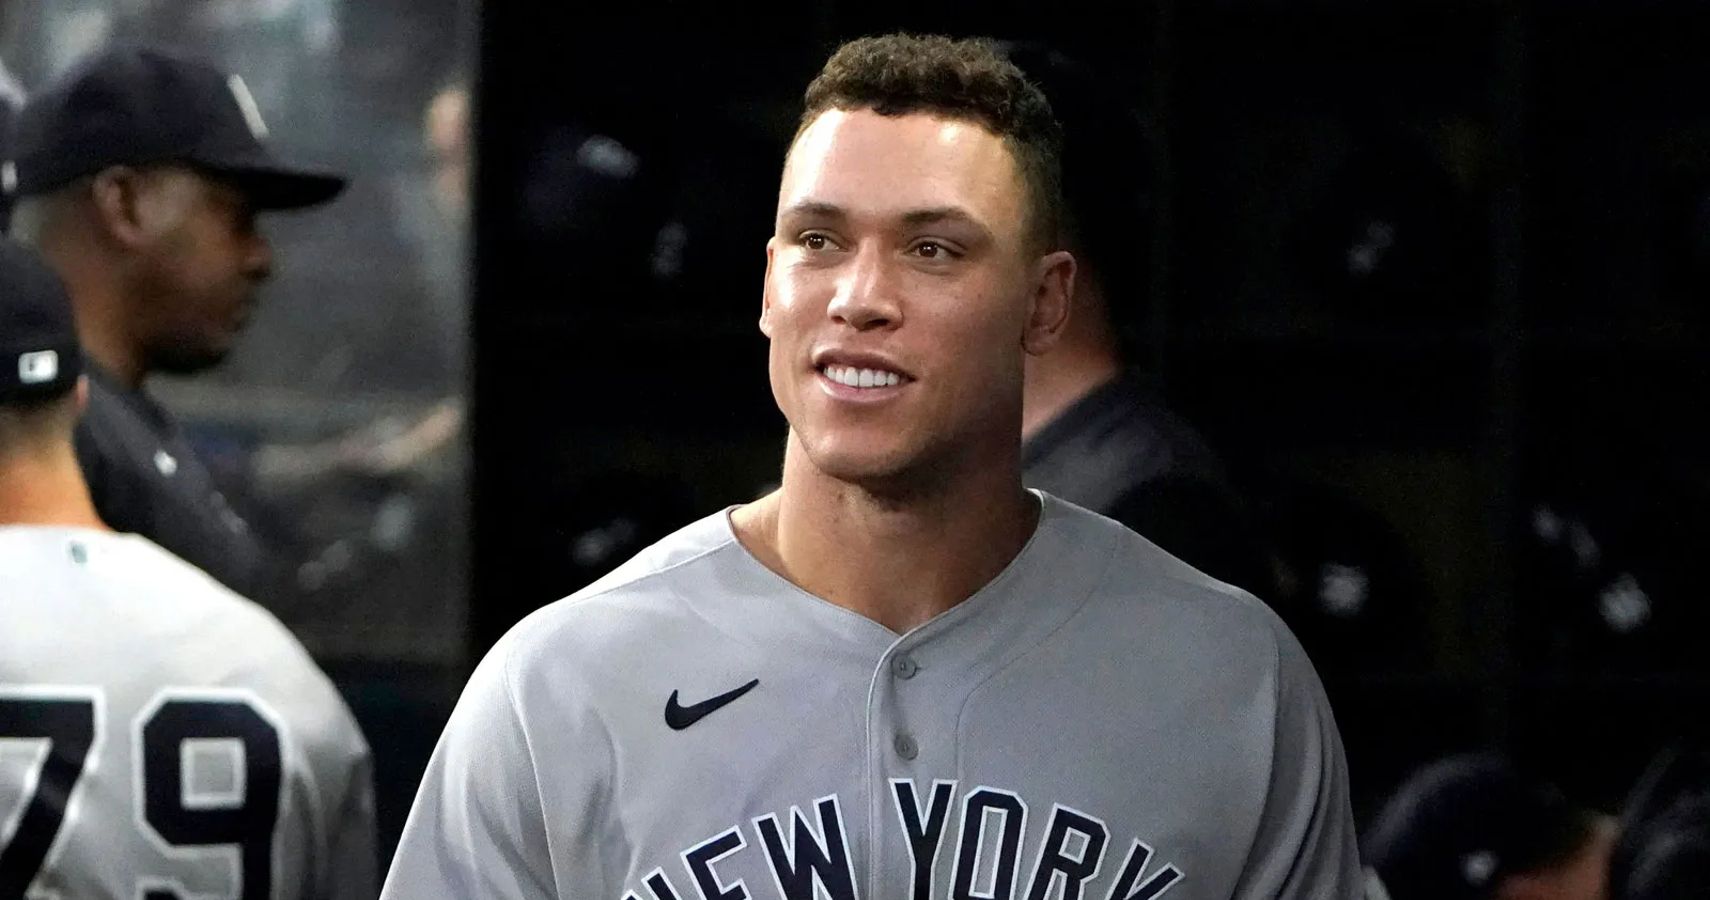 Aaron Judge jersey sells for eye-popping $160,000 at auction